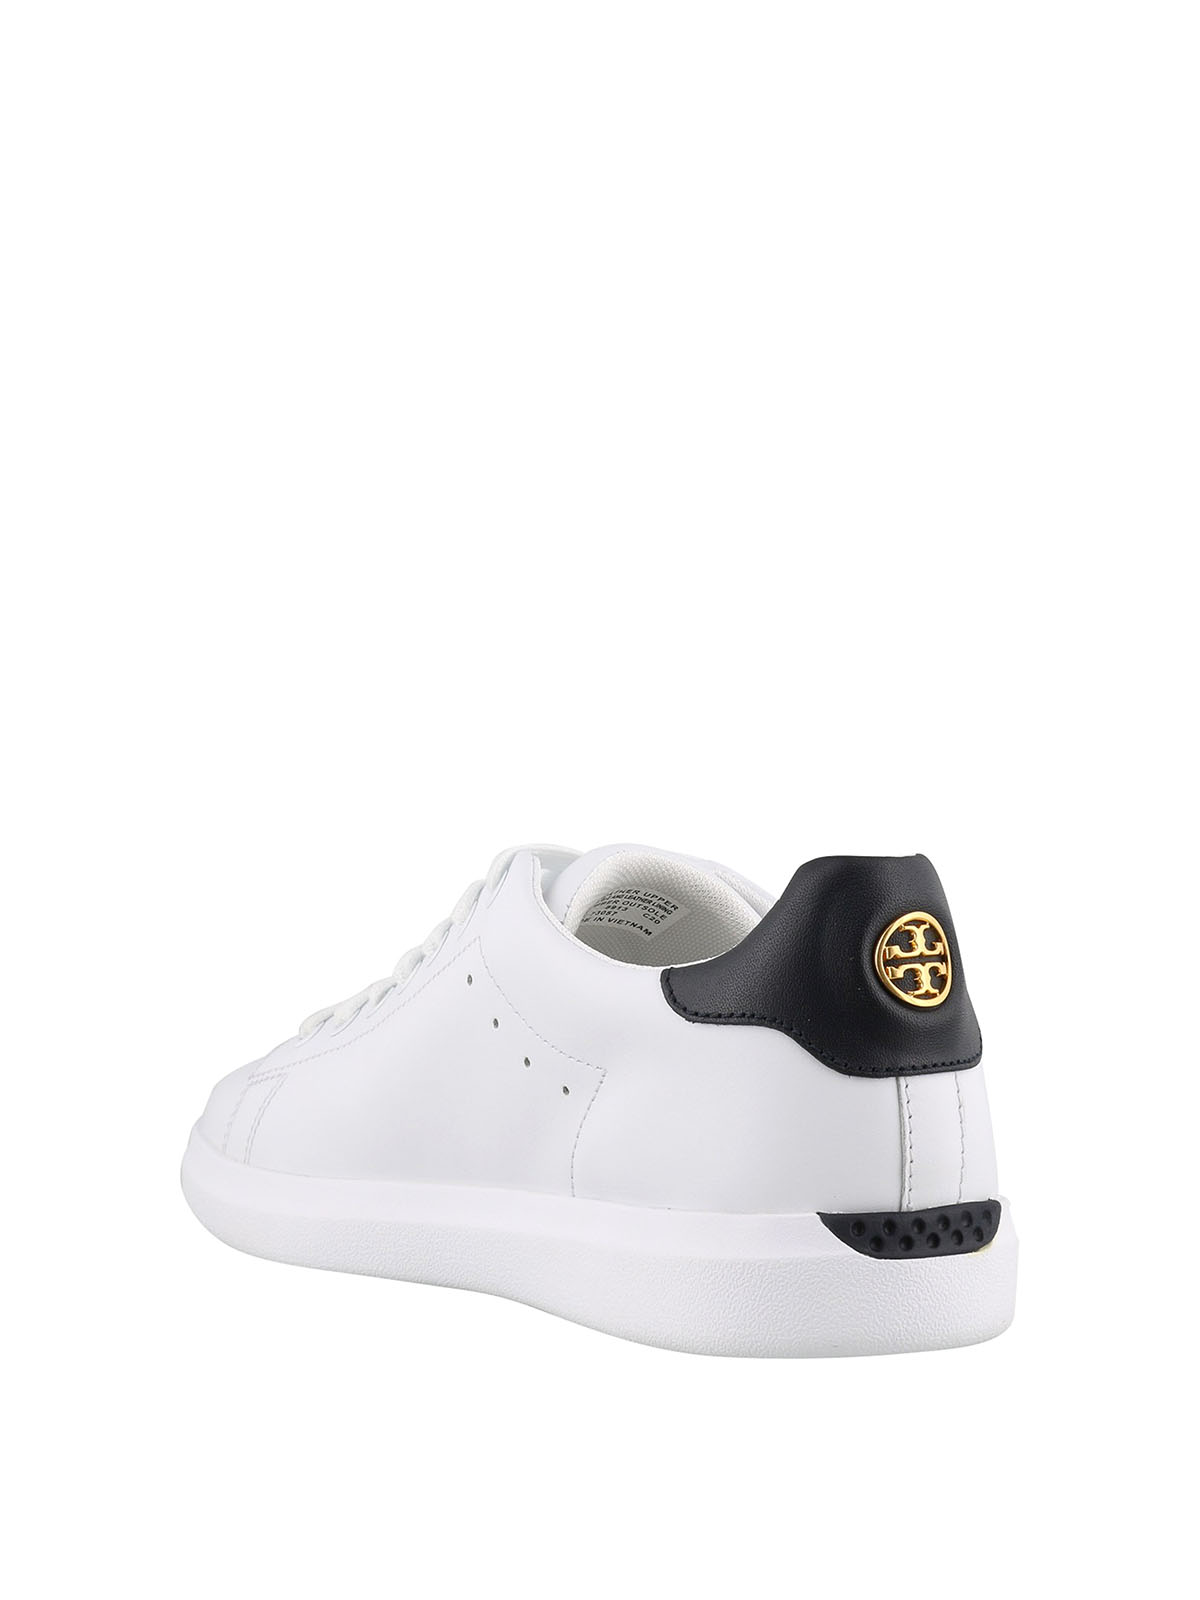 Trainers Tory Burch - Howell Court leather sneakers - 73057130 